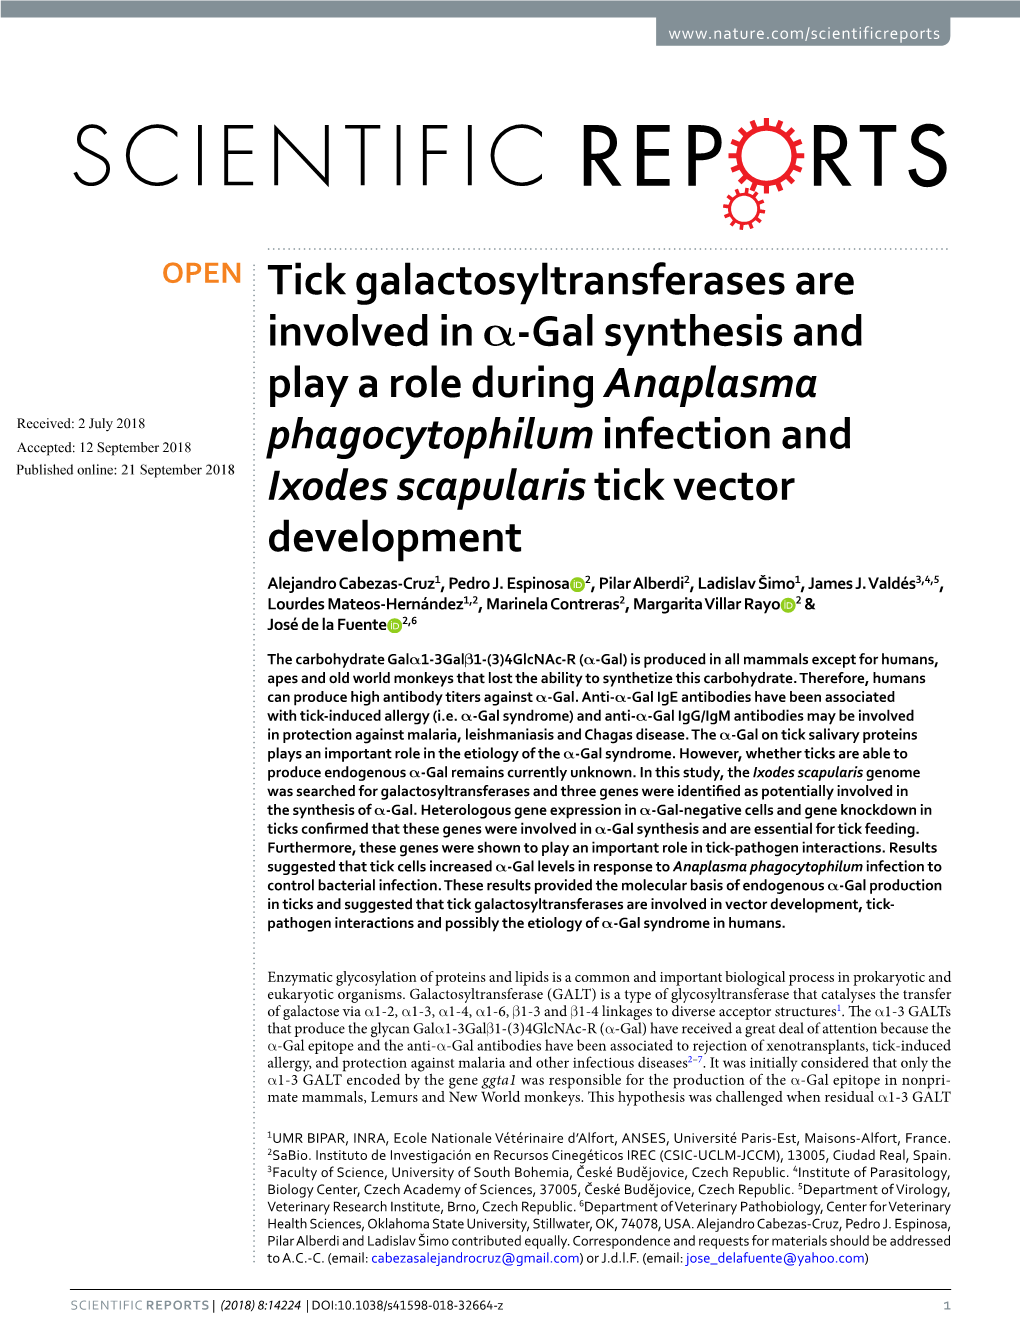 Tick Galactosyltransferases Are Involved in Α-Gal Synthesis And